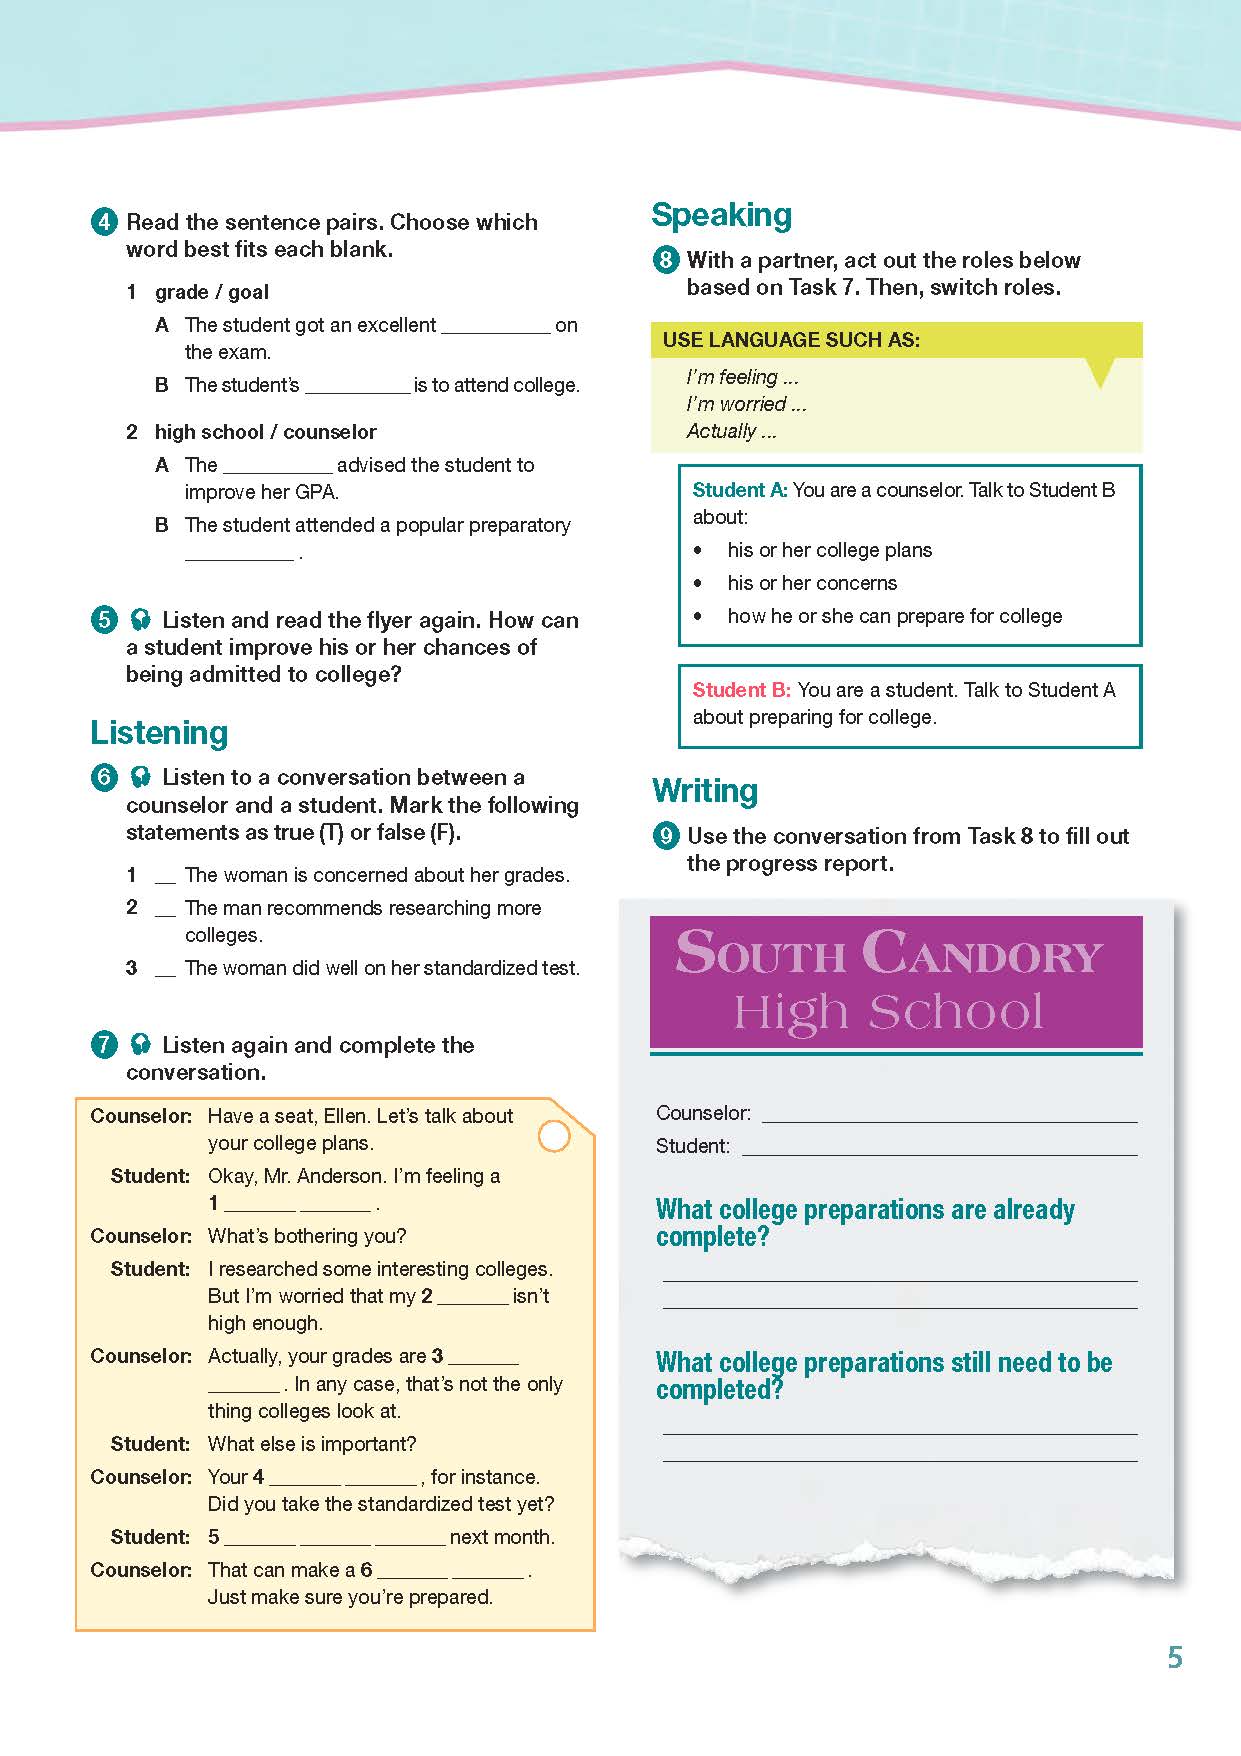 ESP English for Specific Purposes - Career Paths: University Studies - Sample Page 2